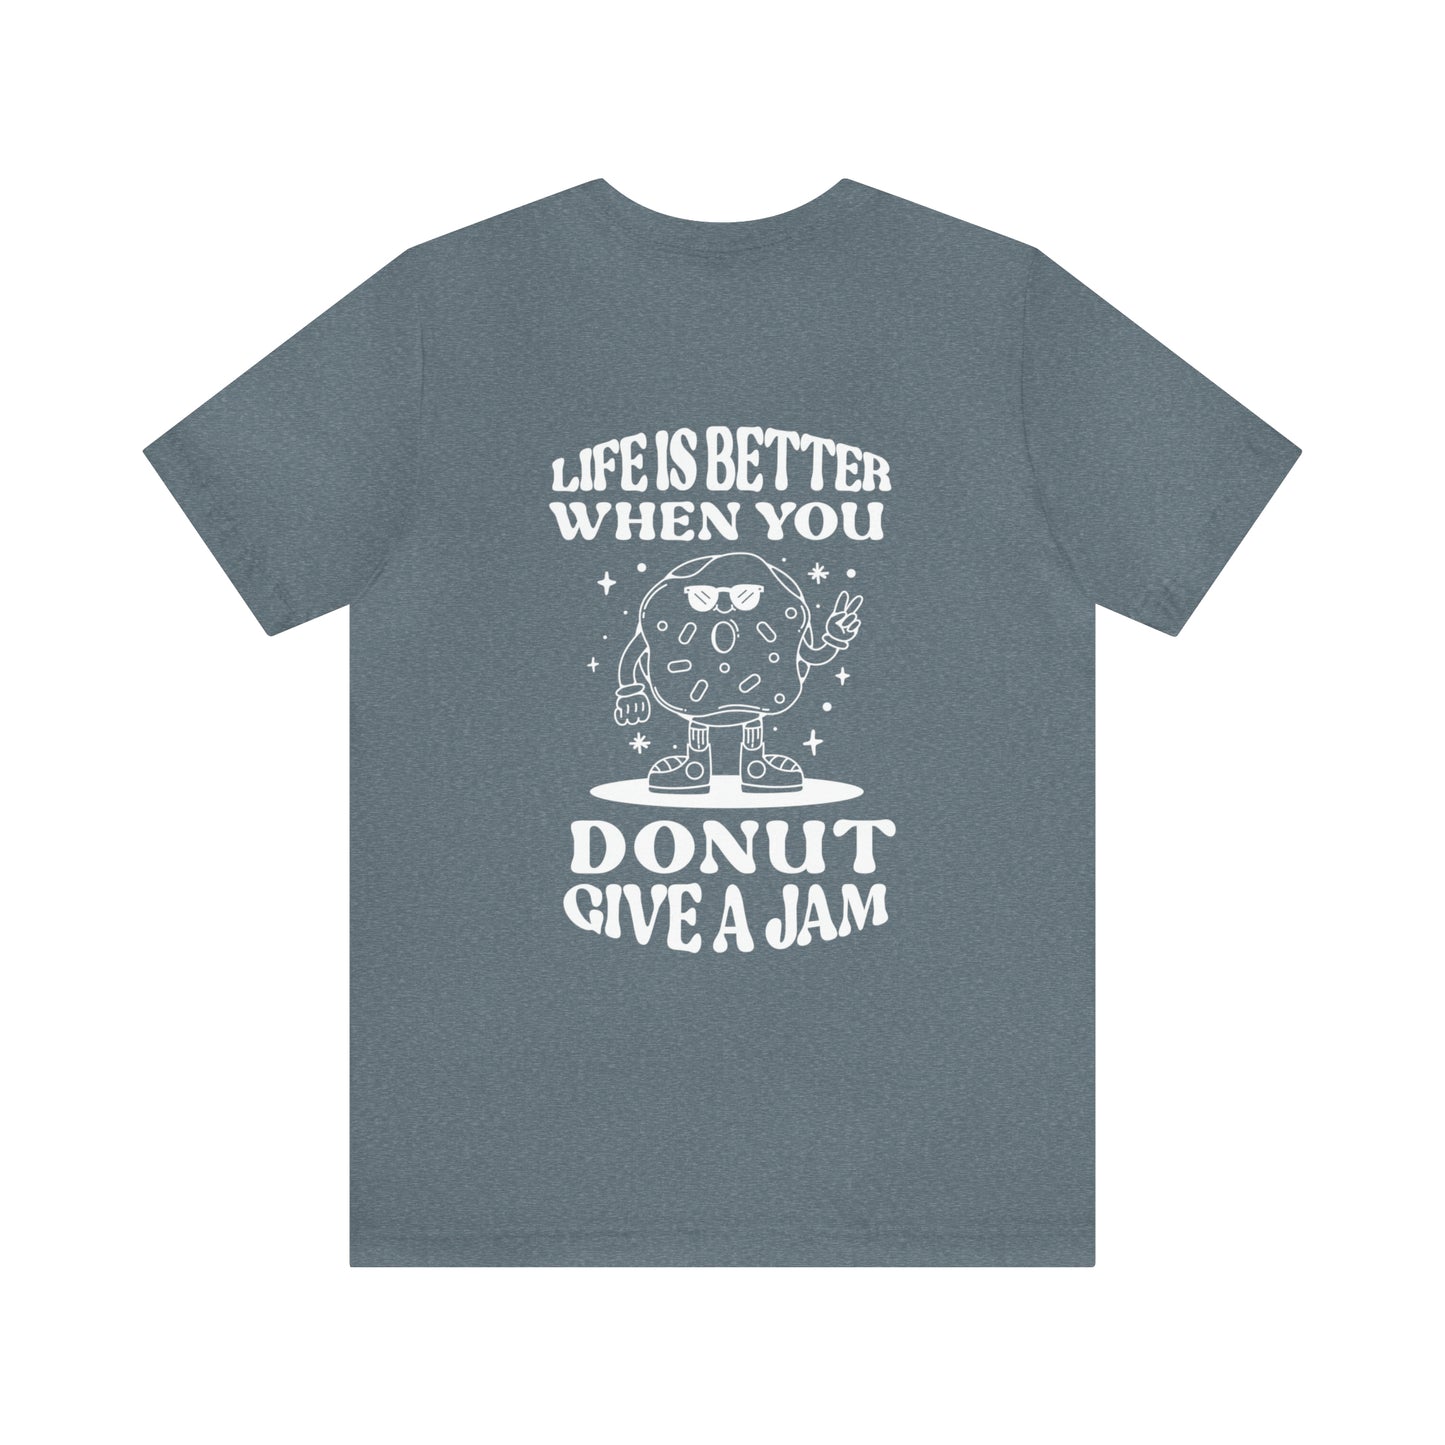 Donut "Donut Give A Jam" Outline Art Soft Cotton Tee